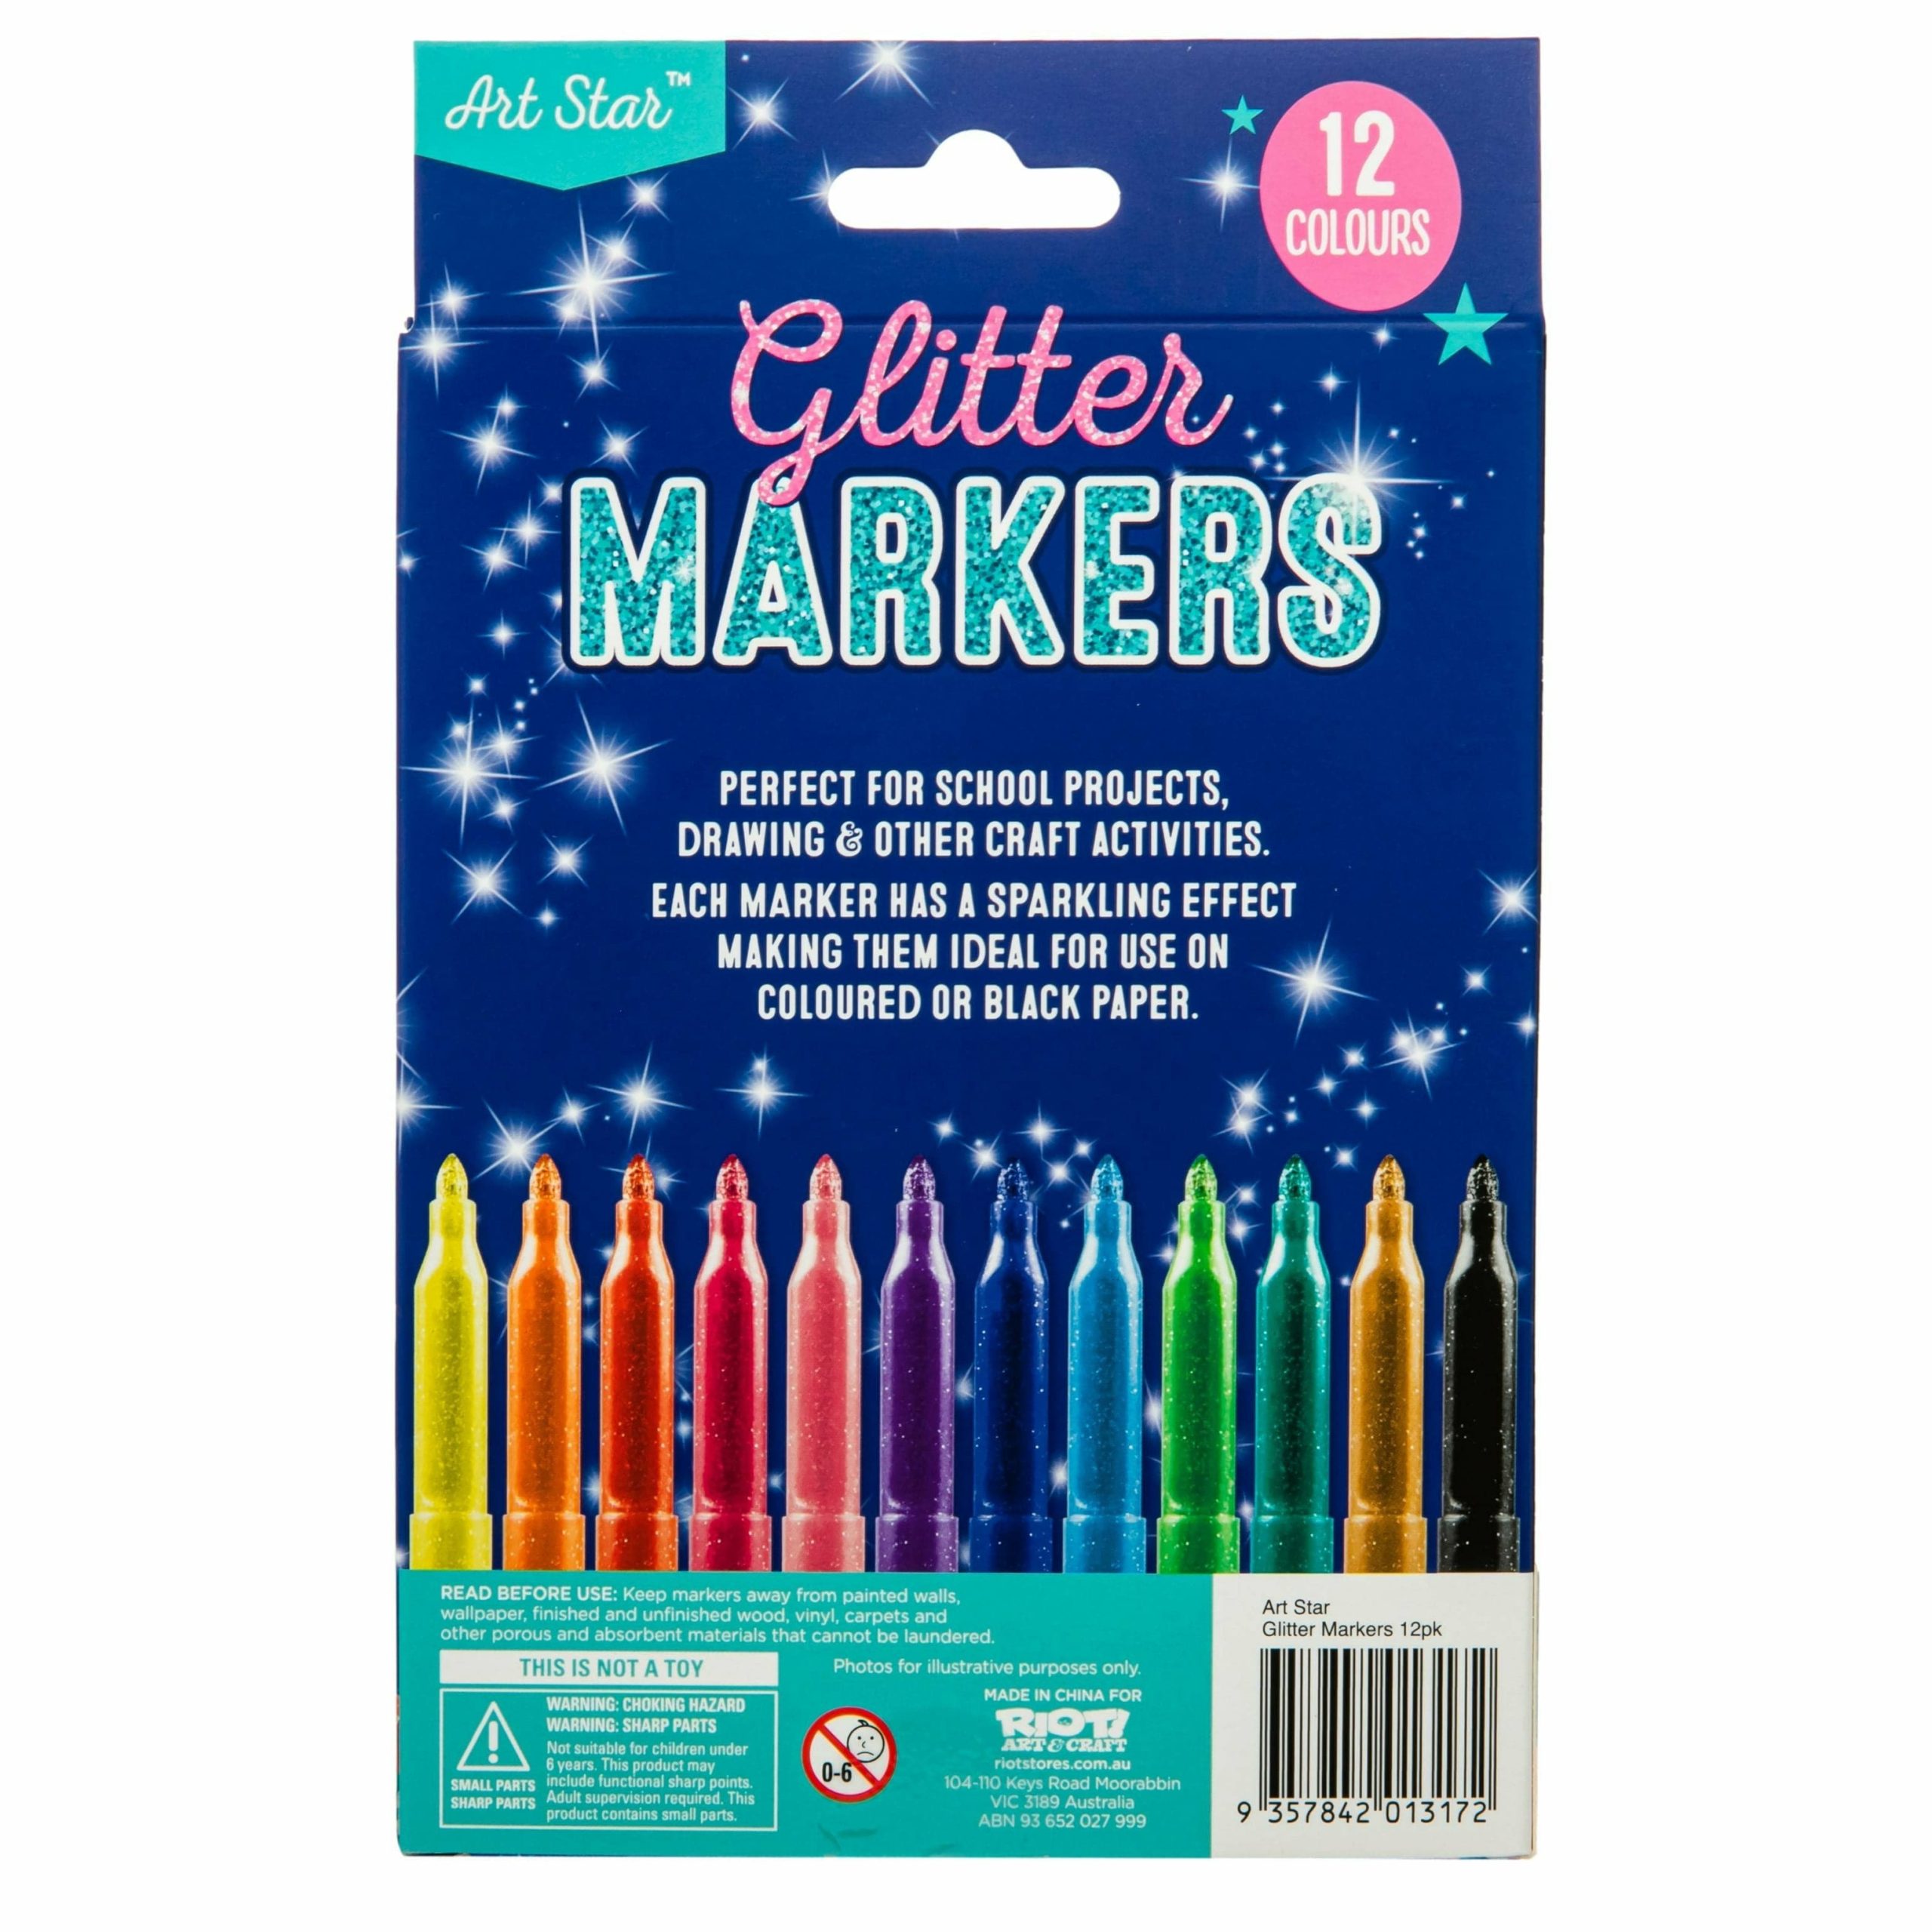 https://www.shopriot.shop/wp-content/uploads/1689/98/find-the-best-deals-on-art-star-glitter-markers-12-pack-951_8-scaled.jpg